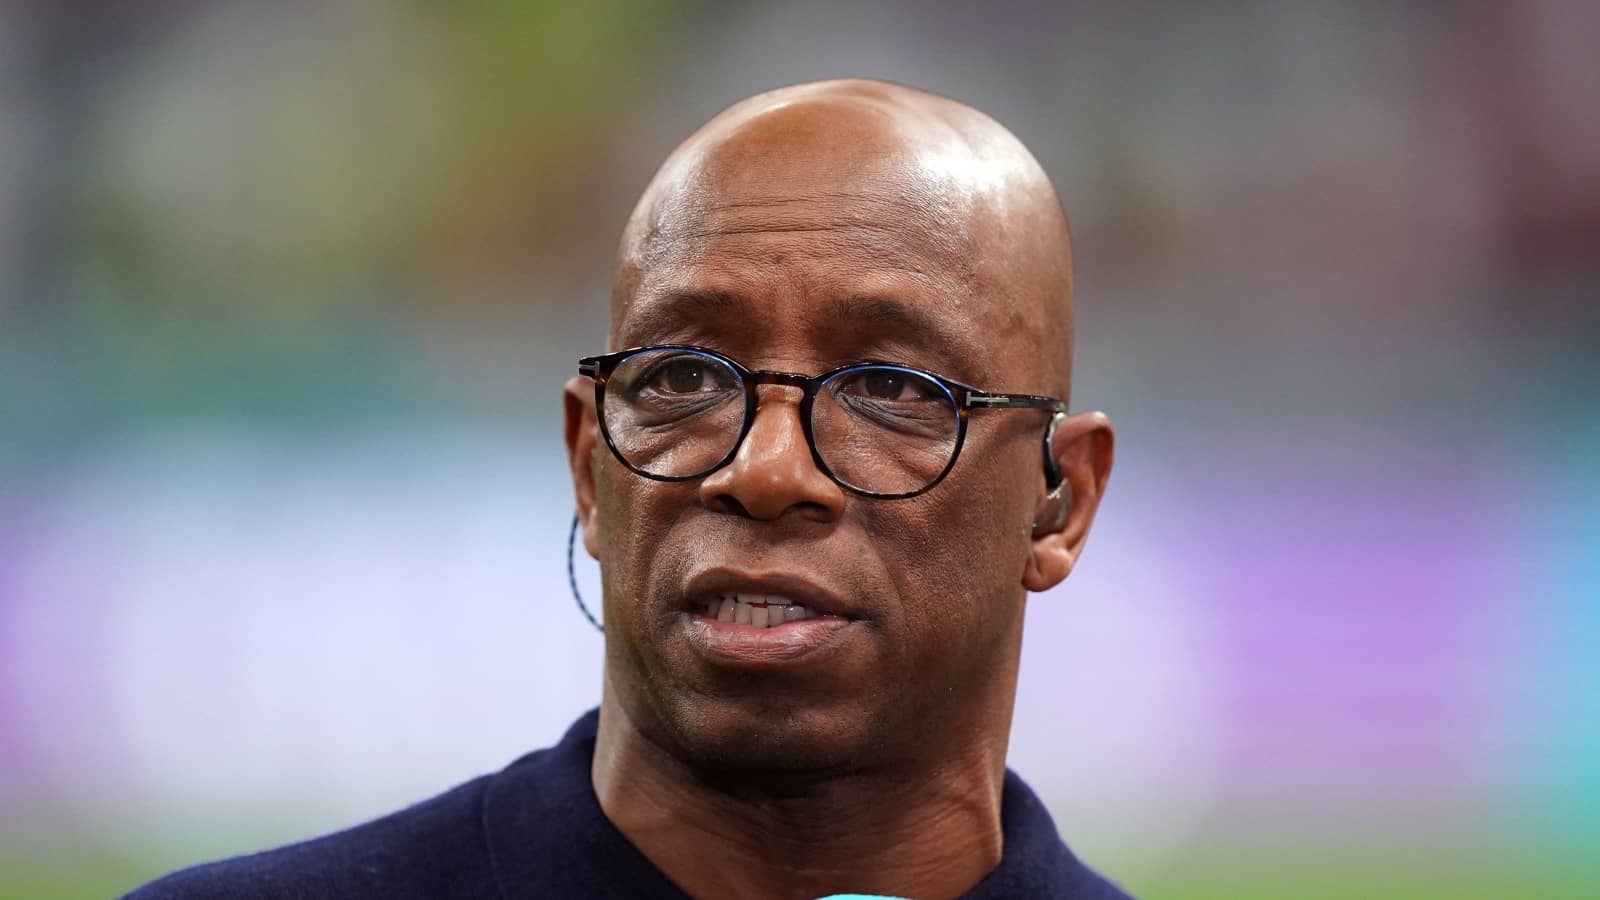 Ian Wright Tells an Arsenal Player that if He Doesn't Do Better, He Might Not Get to Play in the Starting Lineup